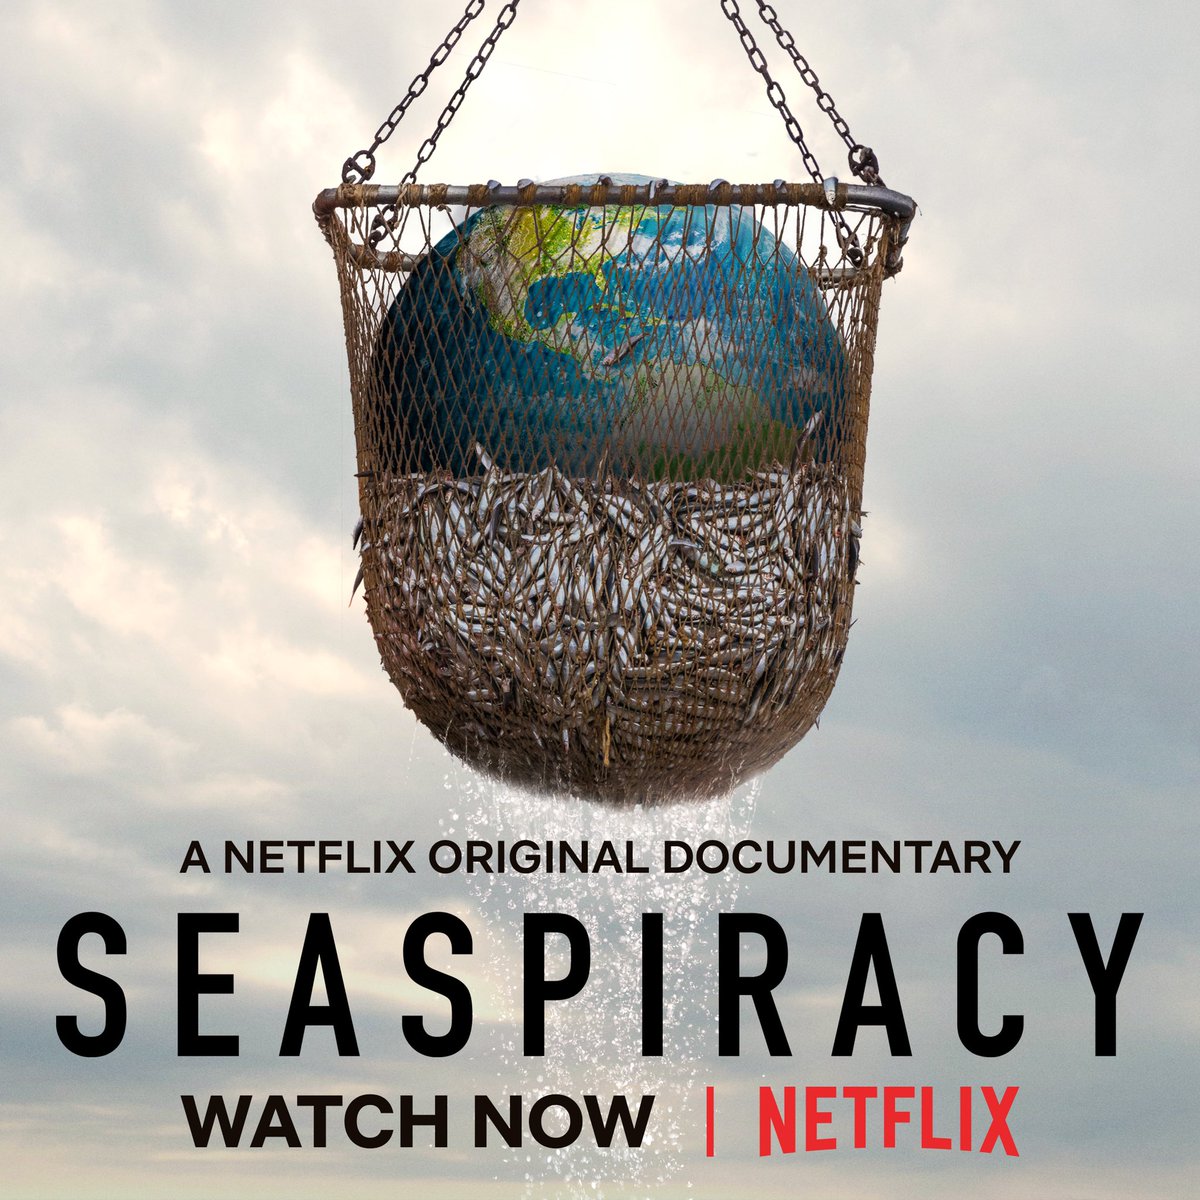 SEASPIRACY IS NOW ON NETFLIX! Please watch, share and spread the word. #seaspiracy